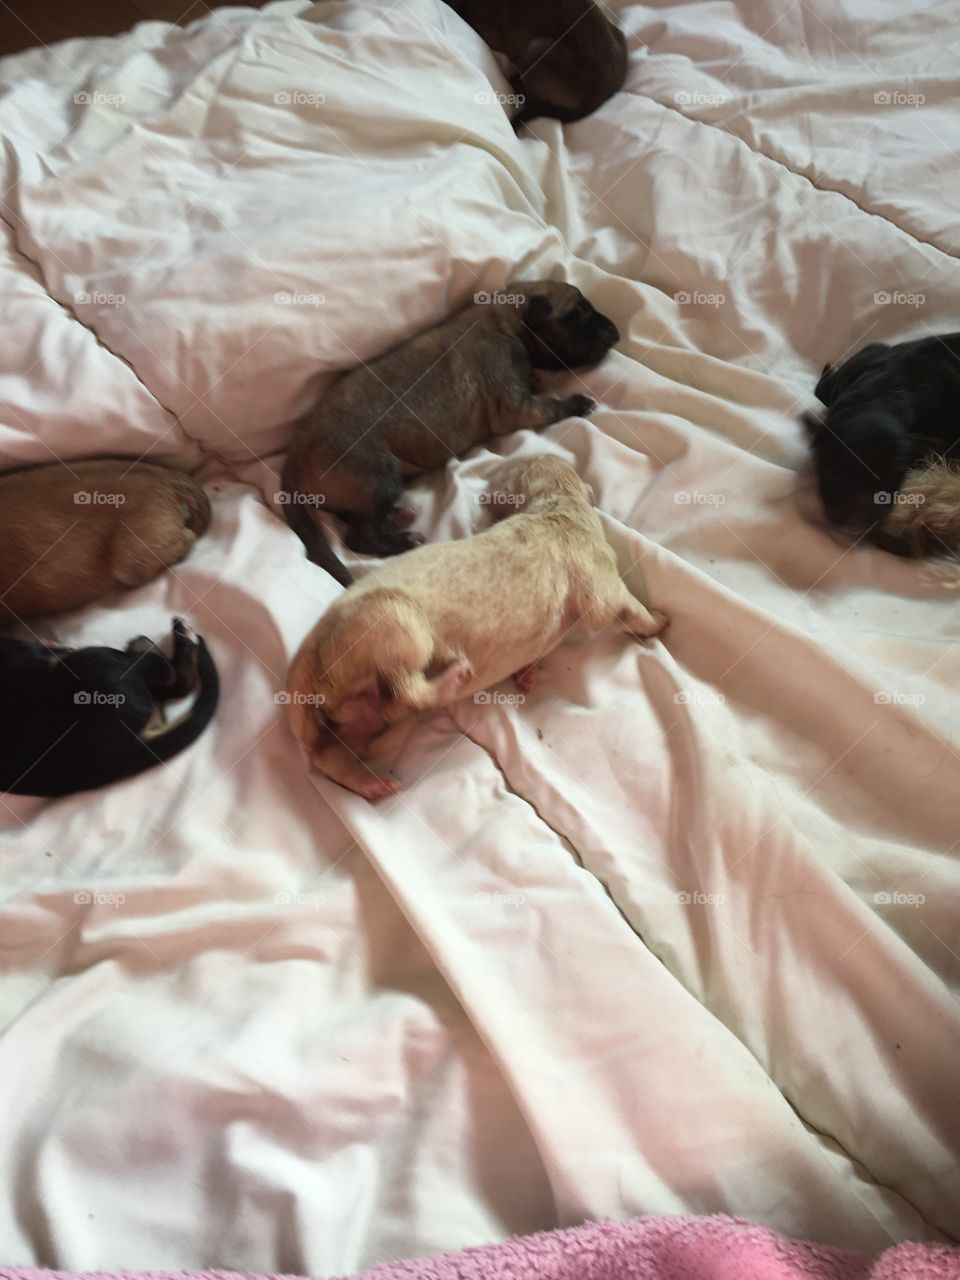 5 new born cut puppies just hours old